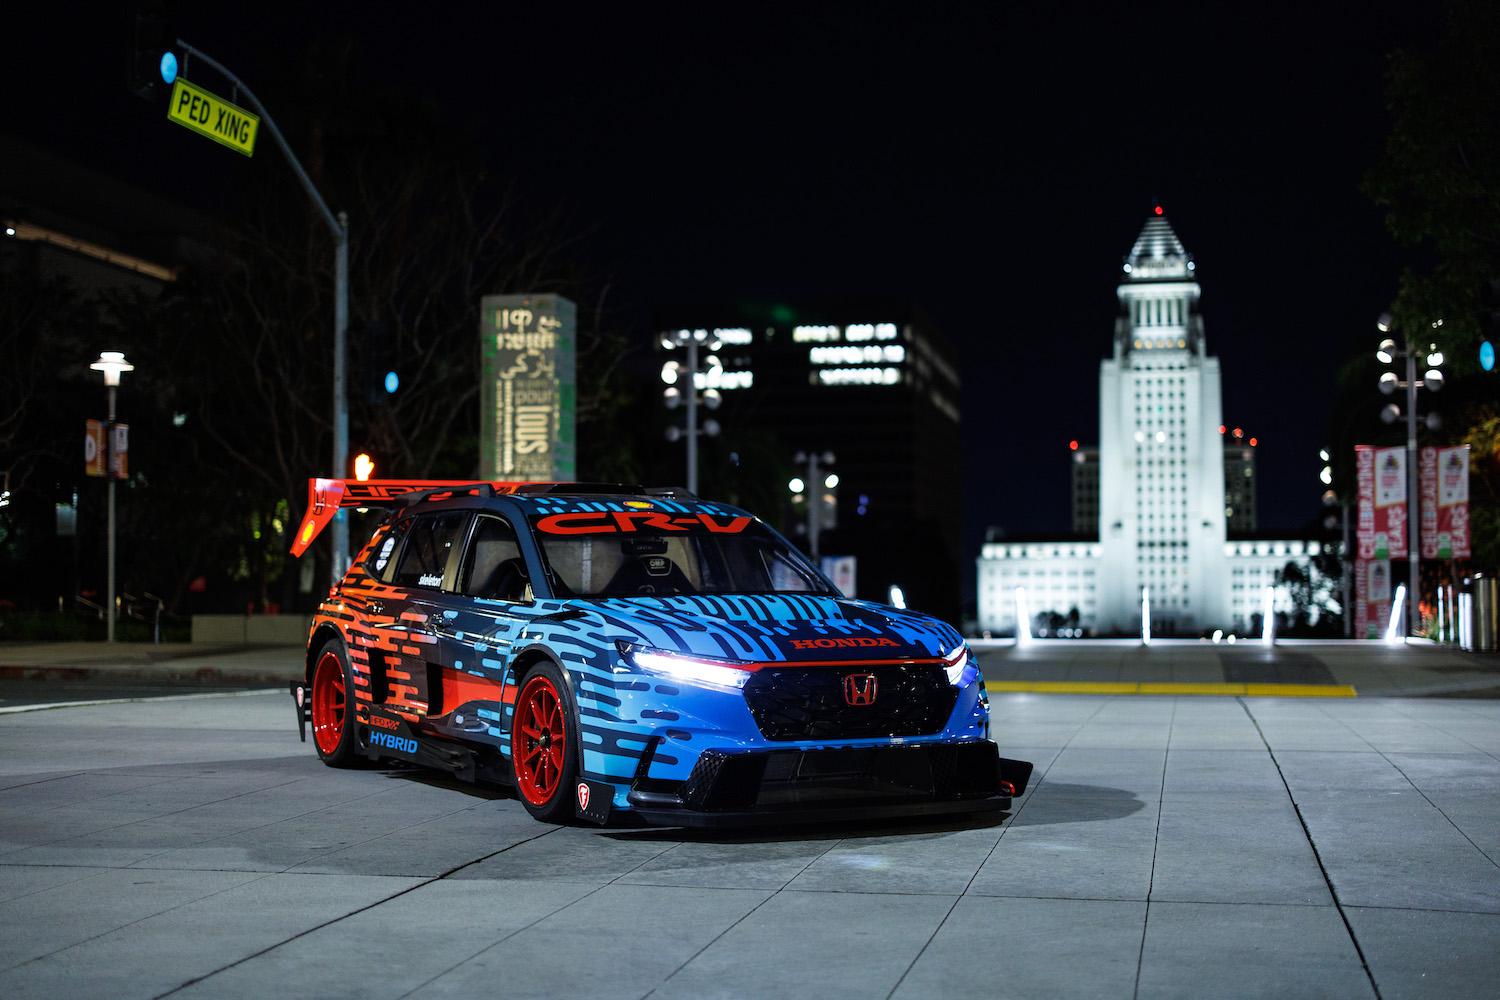 Front end angle of the Honda CR-V Hybrid Racer from the passenger's side at night in front of a statute.